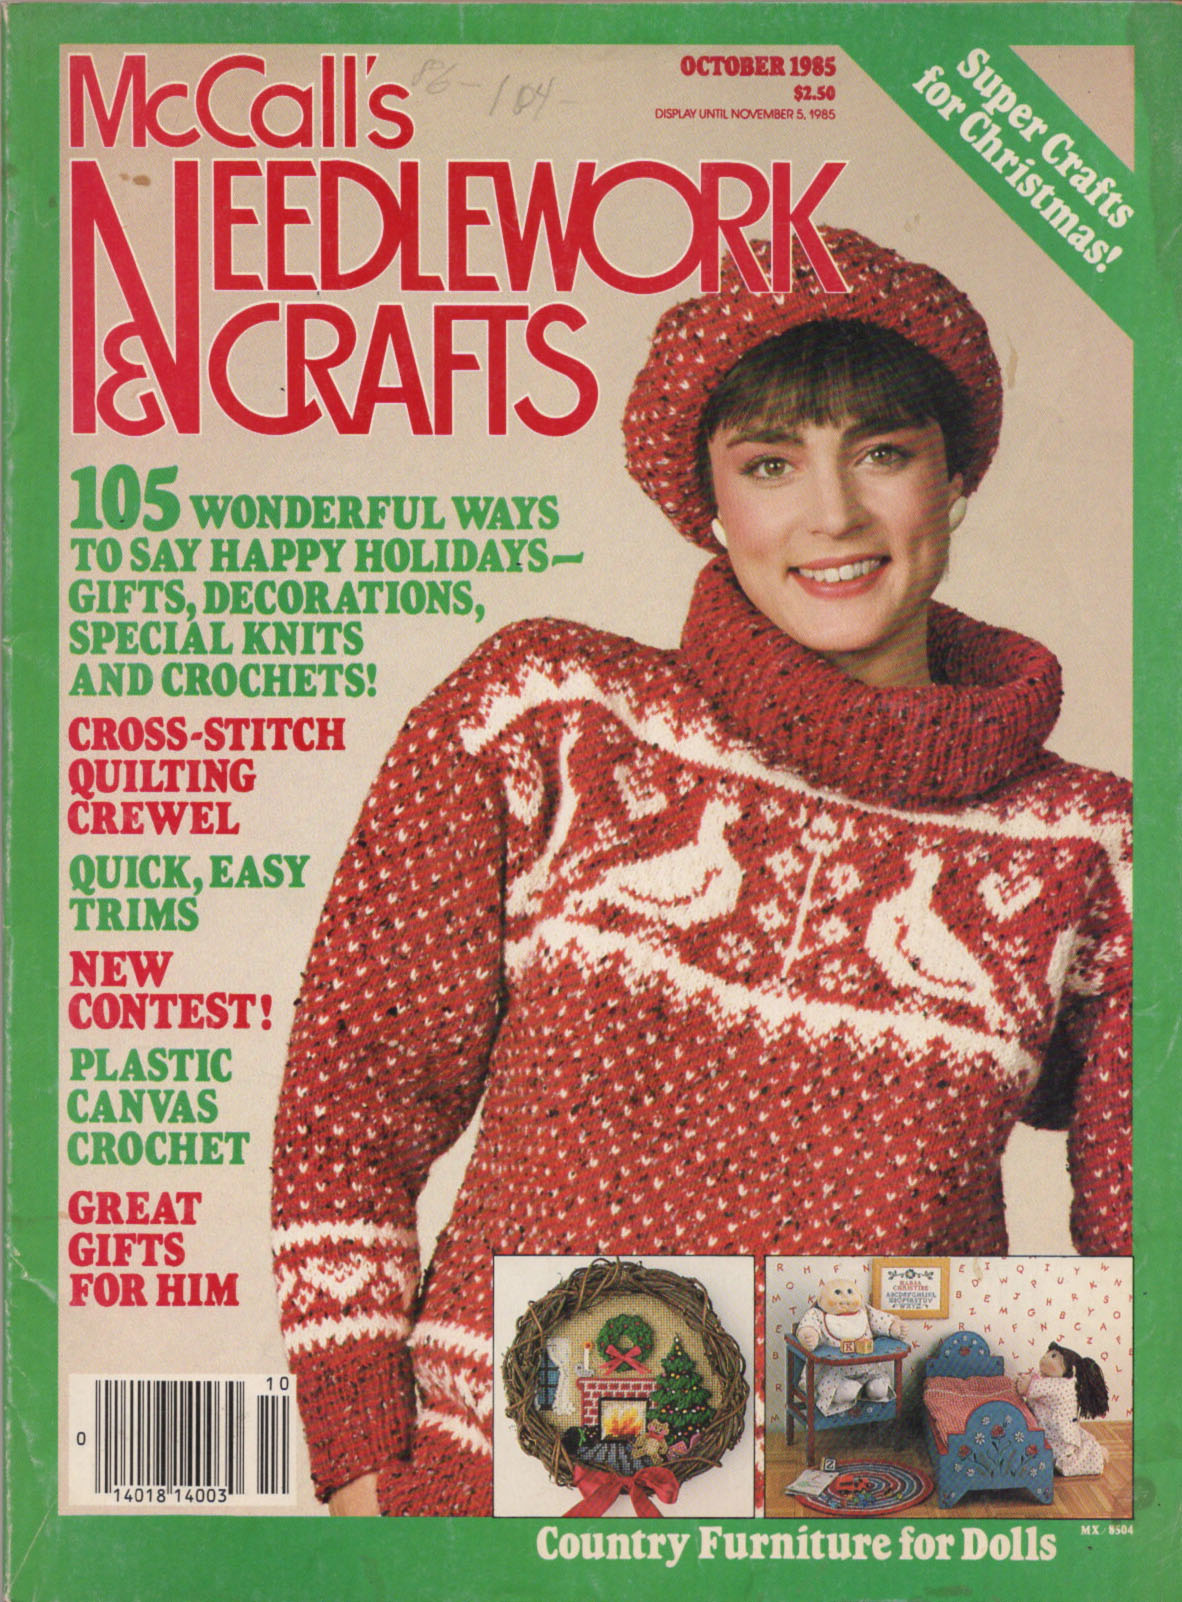 McCall's NEEDLEWORK & CRAFTS - October 1985, Gifts, Doll Furniture